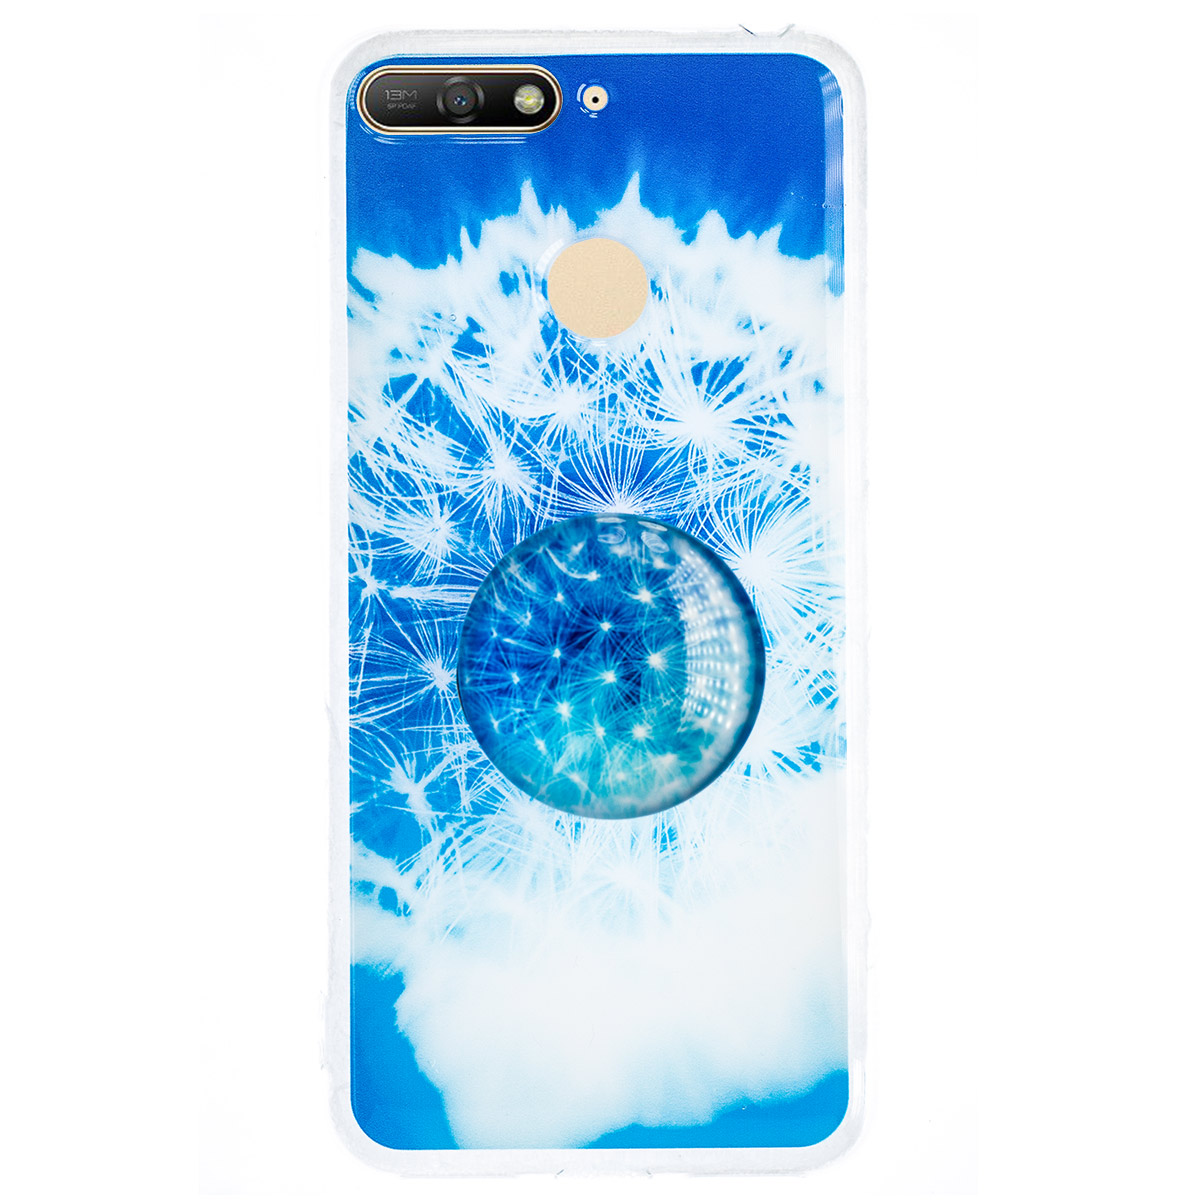 Husa Silicon cu suport Huawei Y6 2018, Floral thumb